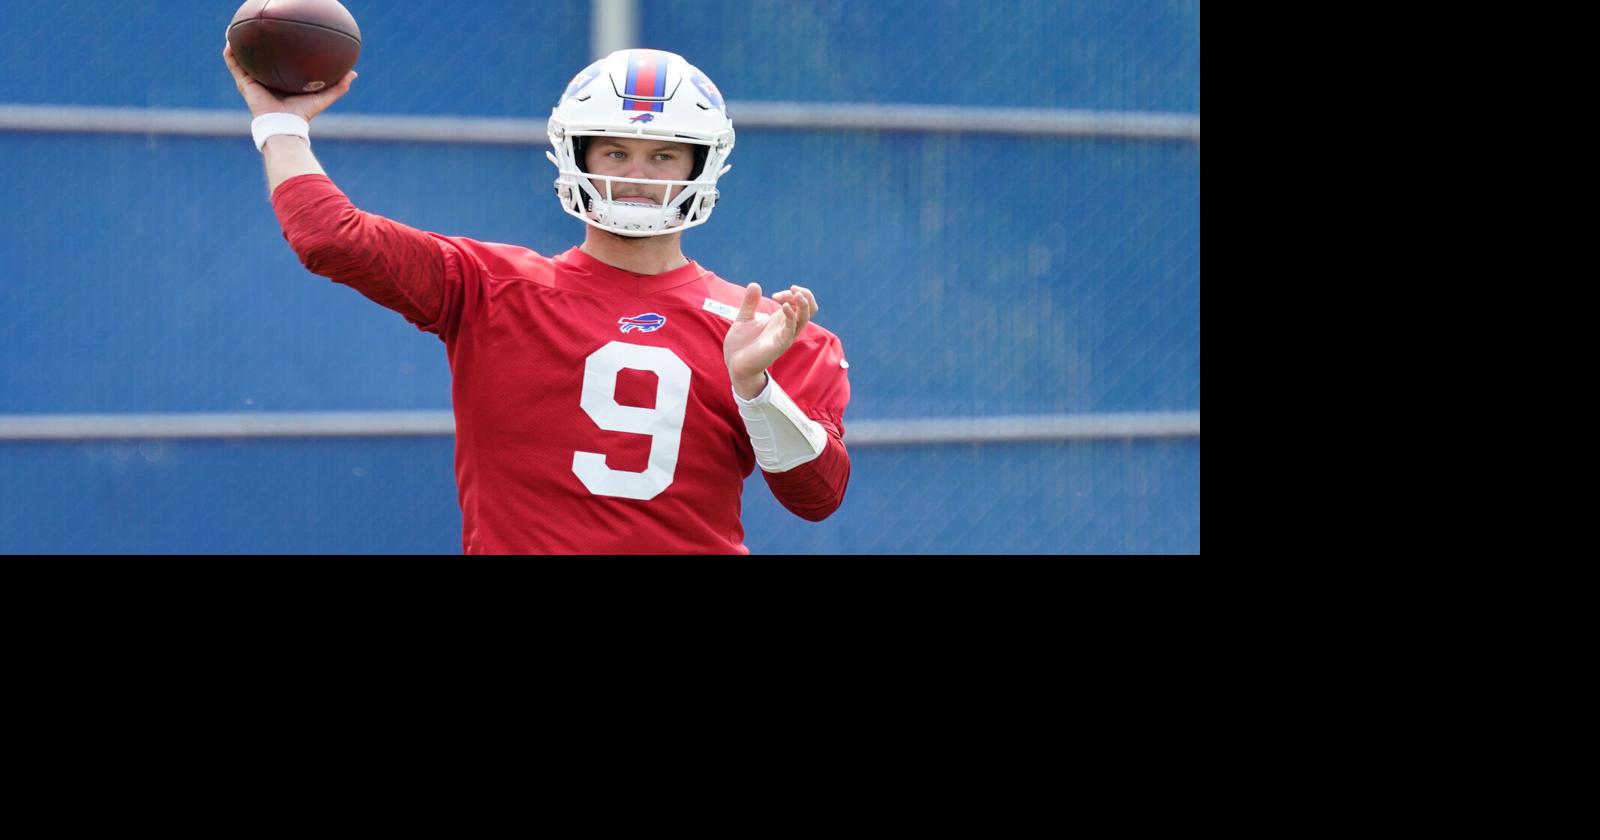 We've reached halftime. Has Kyle Allen done enough to solidify his spot as  QB2? I believe he has shown good command of the #Bills offense…